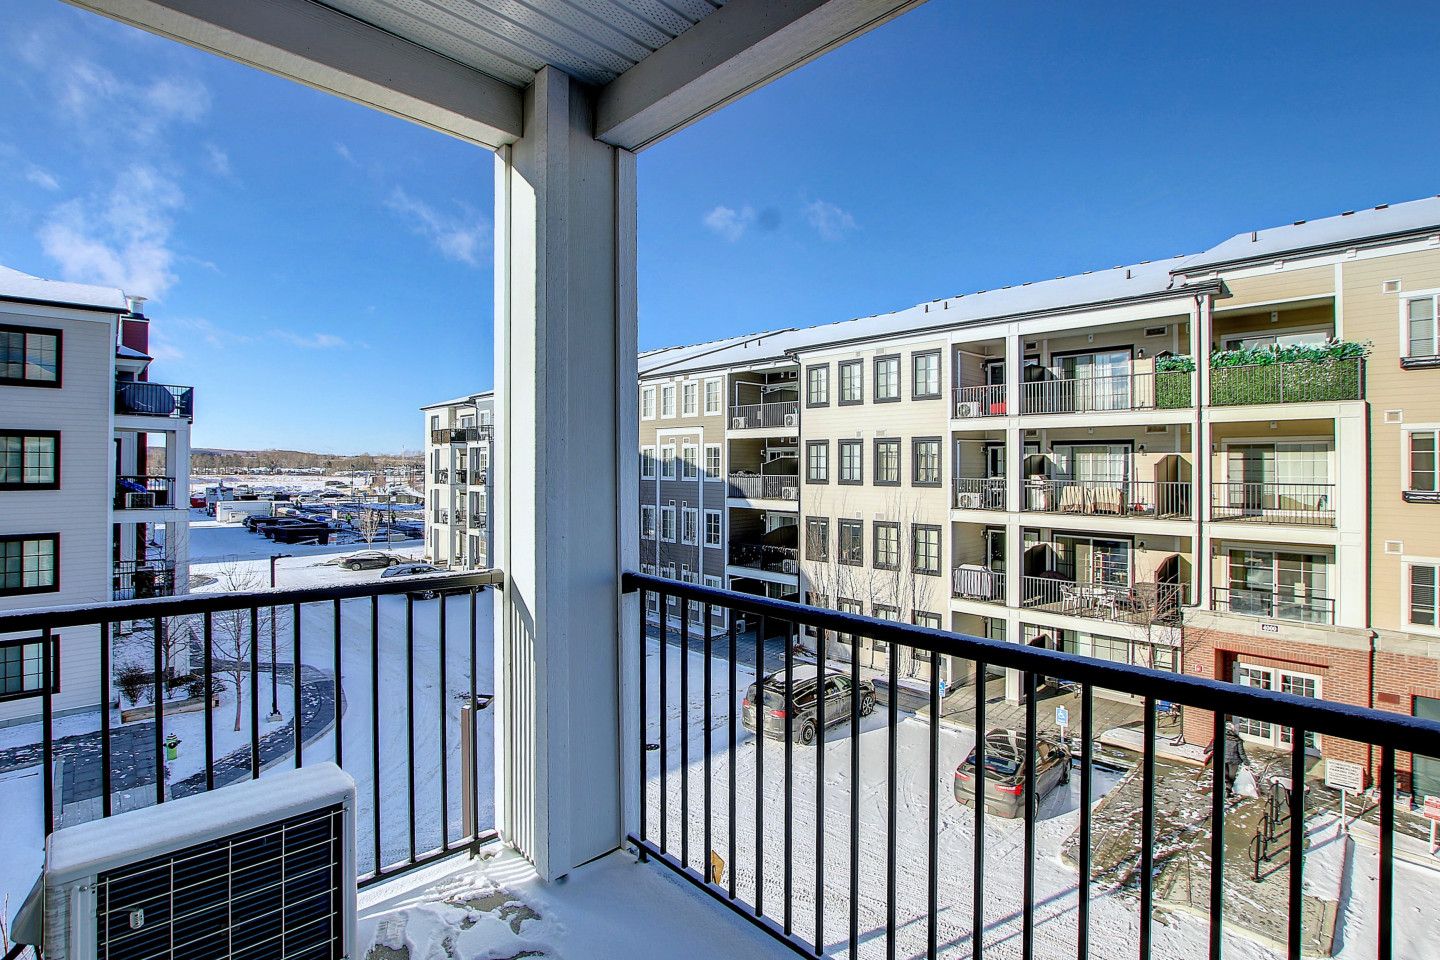 Taking a closer look at my latest listing in My Legacy Park: Beautiful 2 bedroom condo under $290,000